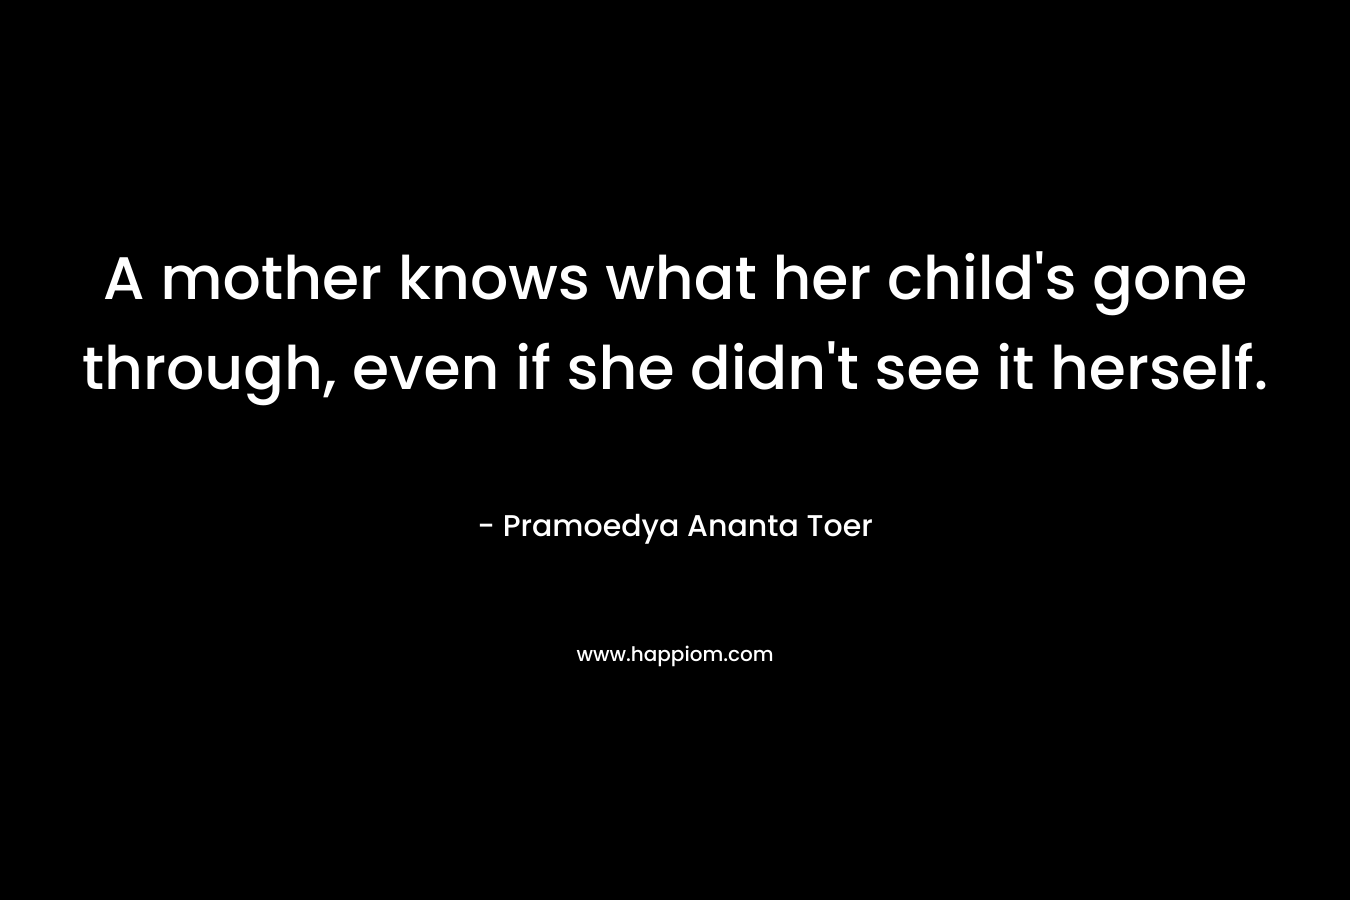 A mother knows what her child’s gone through, even if she didn’t see it herself. – Pramoedya Ananta Toer